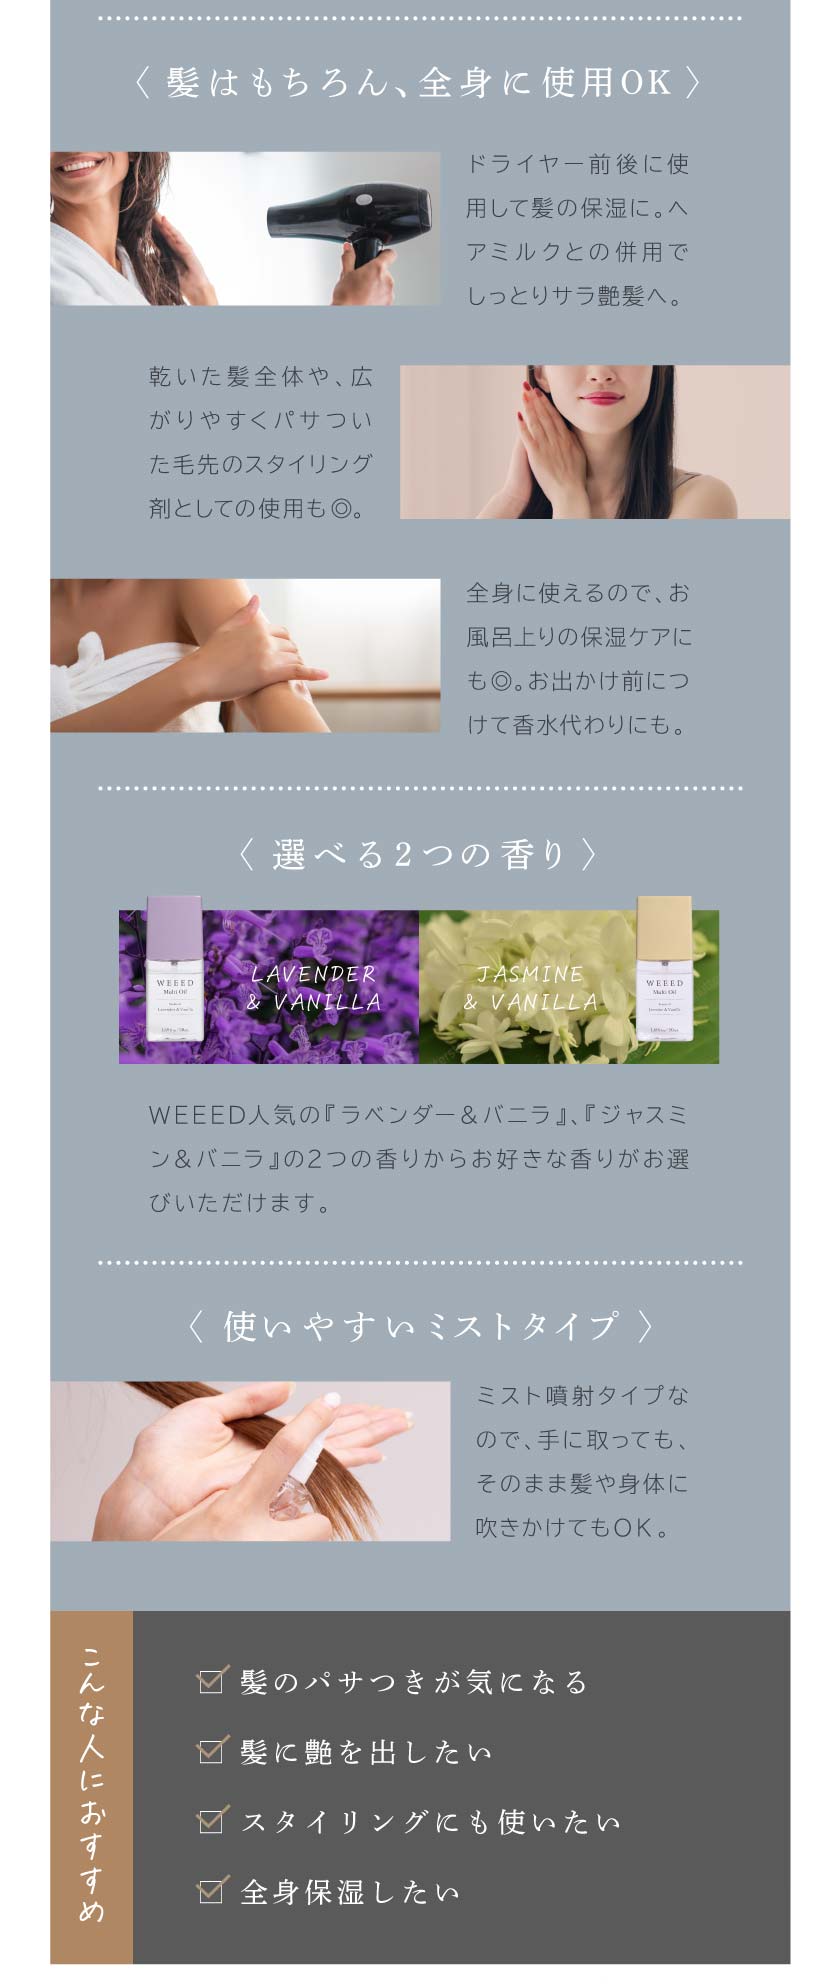 ABOUT W.M.O　MULTI OIL ～WEEED マルチオイル～